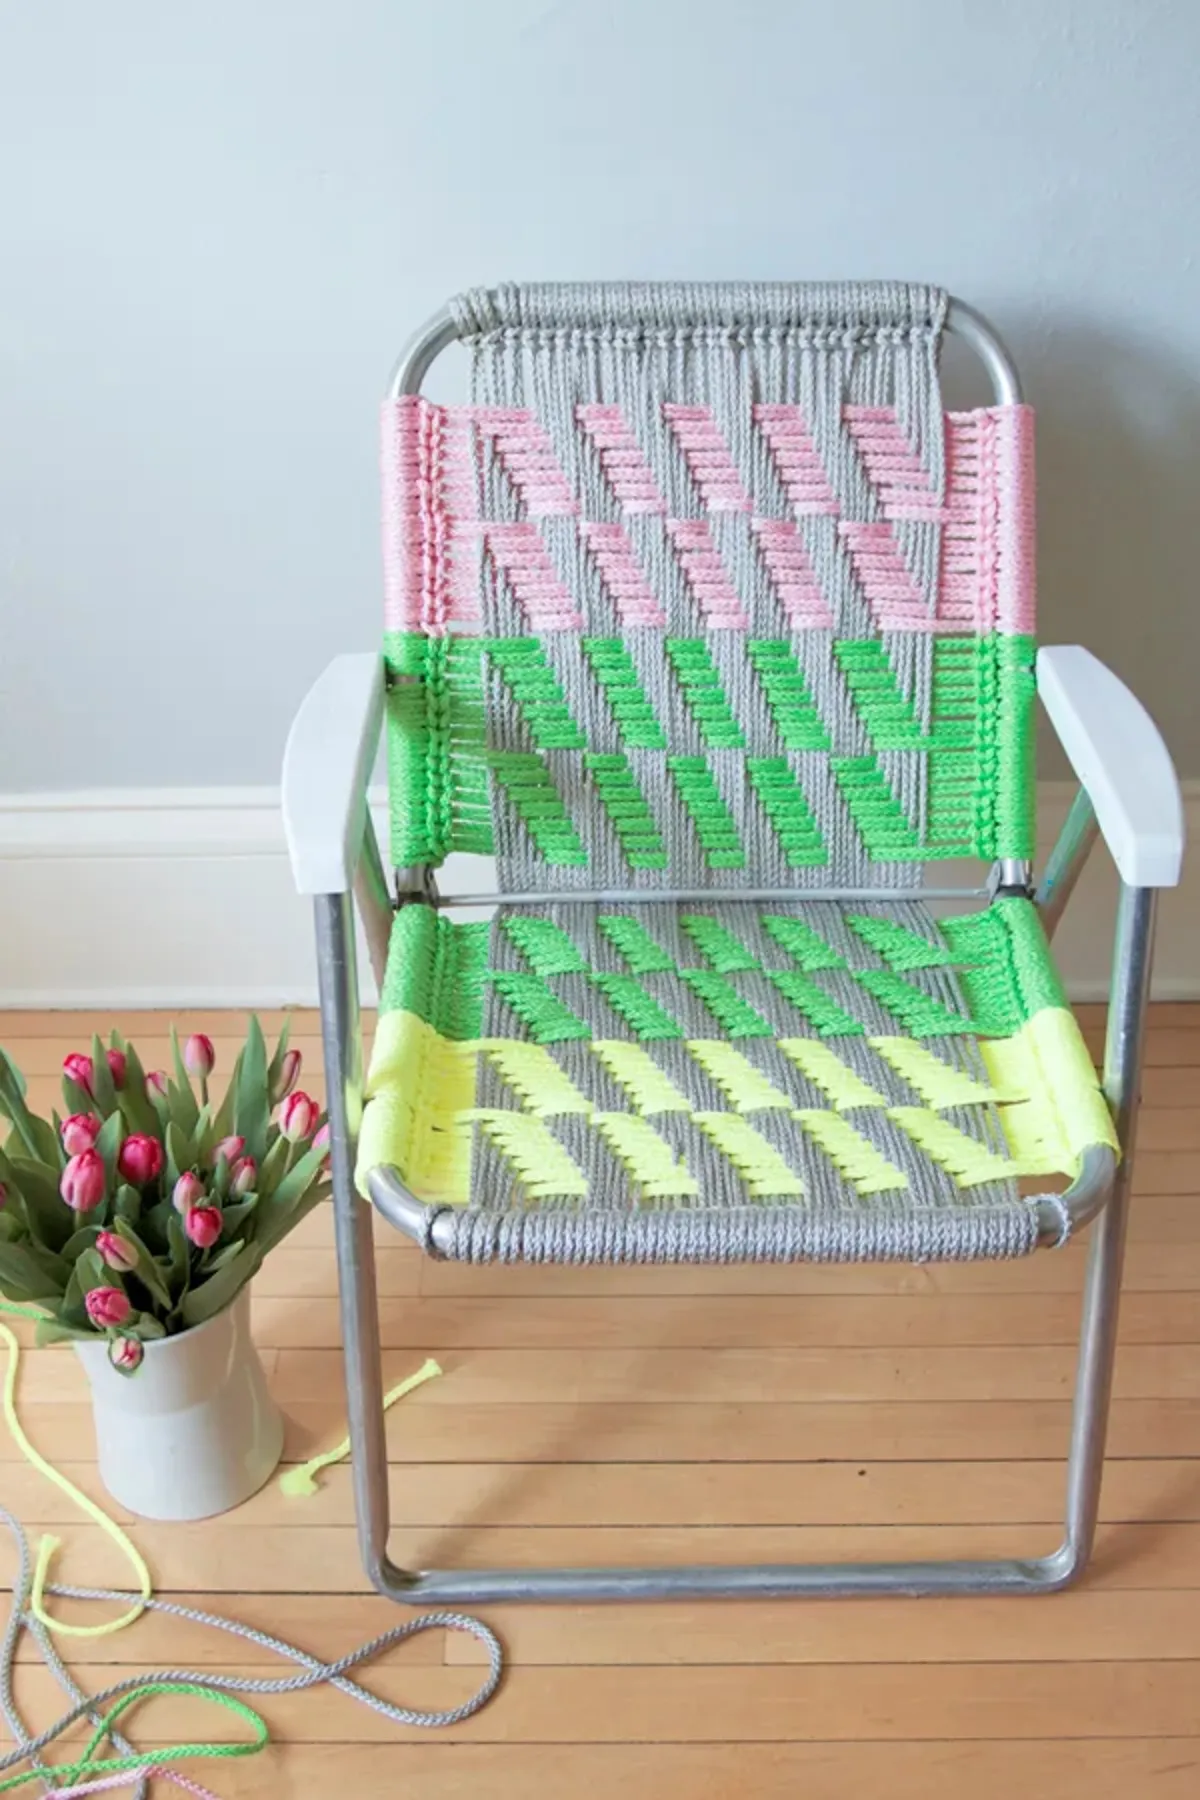 Folding metal chair upcycled with colourful macrame in stripes of yellow, green and pink